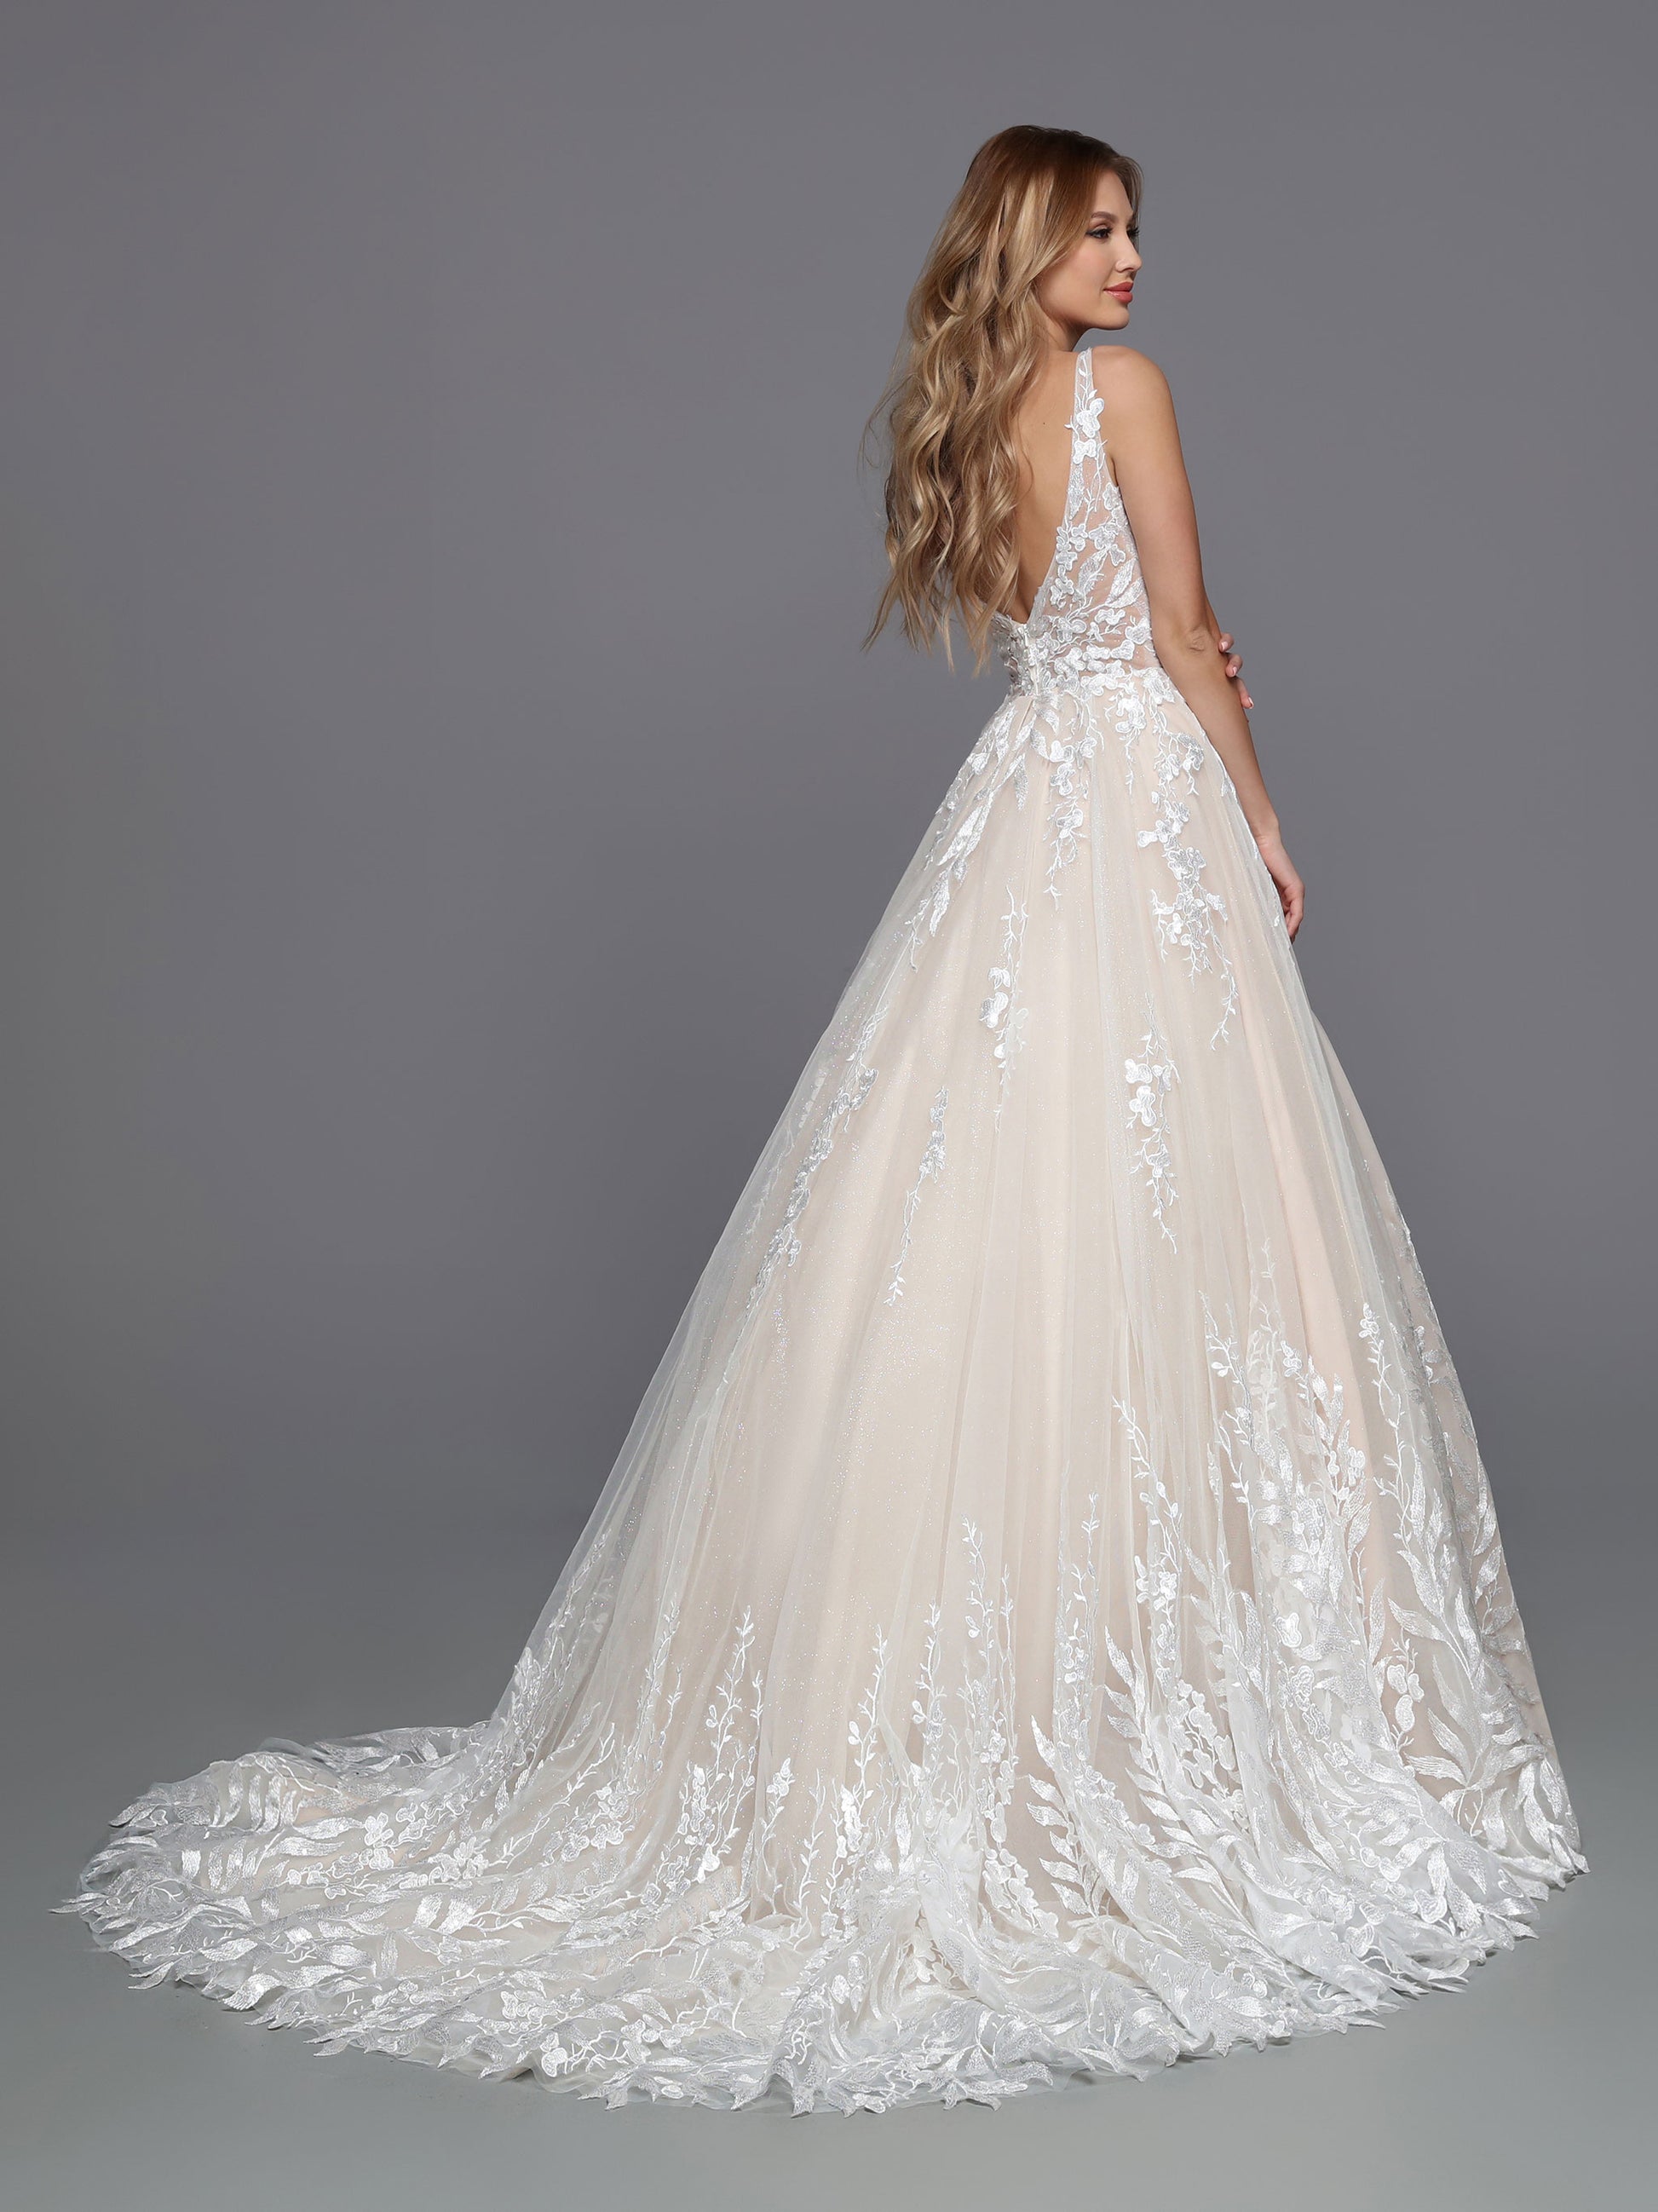 DaVinci Bridal 50751 A-Line Ballgown Sweetheart Neckline Tulle Lace Appliques Sheer Open Back Wedding Gown. The modern lines of this tulle and lace ball gown are softened by blossom and vine lace that wraps the bodice and trails down the skirt to create a textured hem for the chapel train.